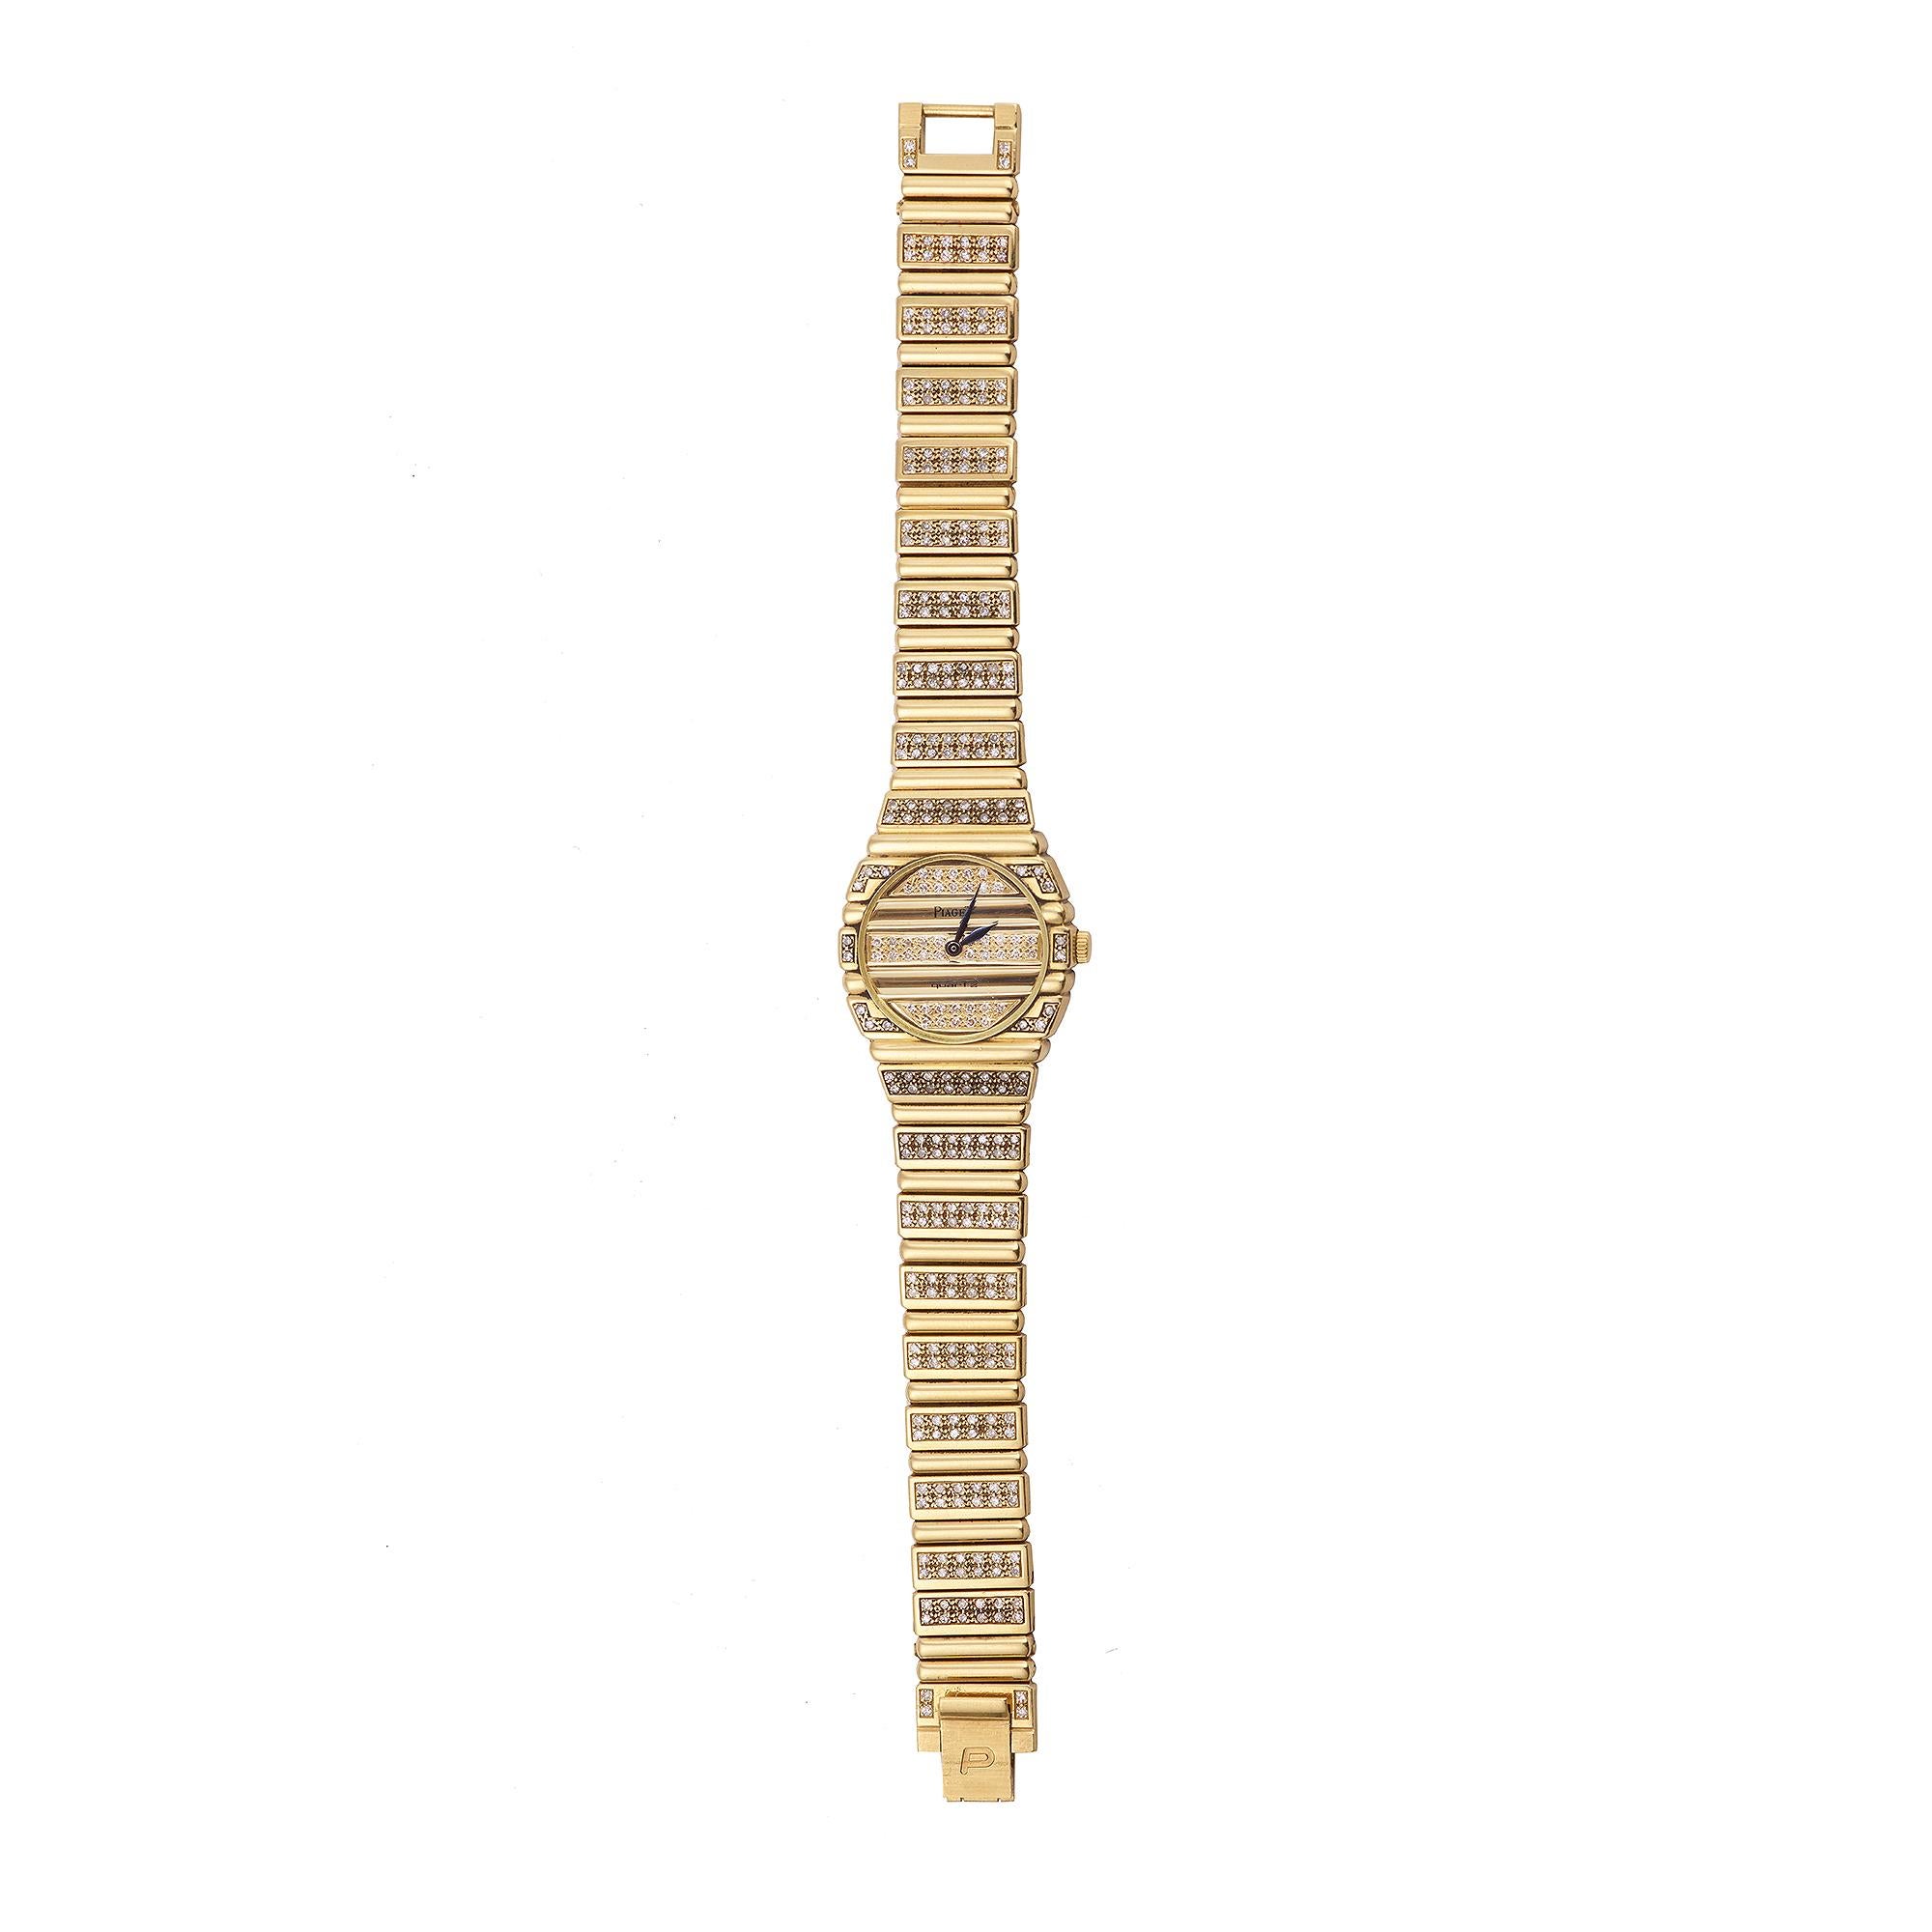 Beautiful Piaget “Polo” watch in yellow gold set with a multitude of small brilliant-cut diamonds.Circa 1980-1990.

Quartz movement: 7P3 caliber

Weight of the watch: 81.8 g

Dial diameter: 24 mm (0.948 inches)

Strap length: 16 cm (6.299